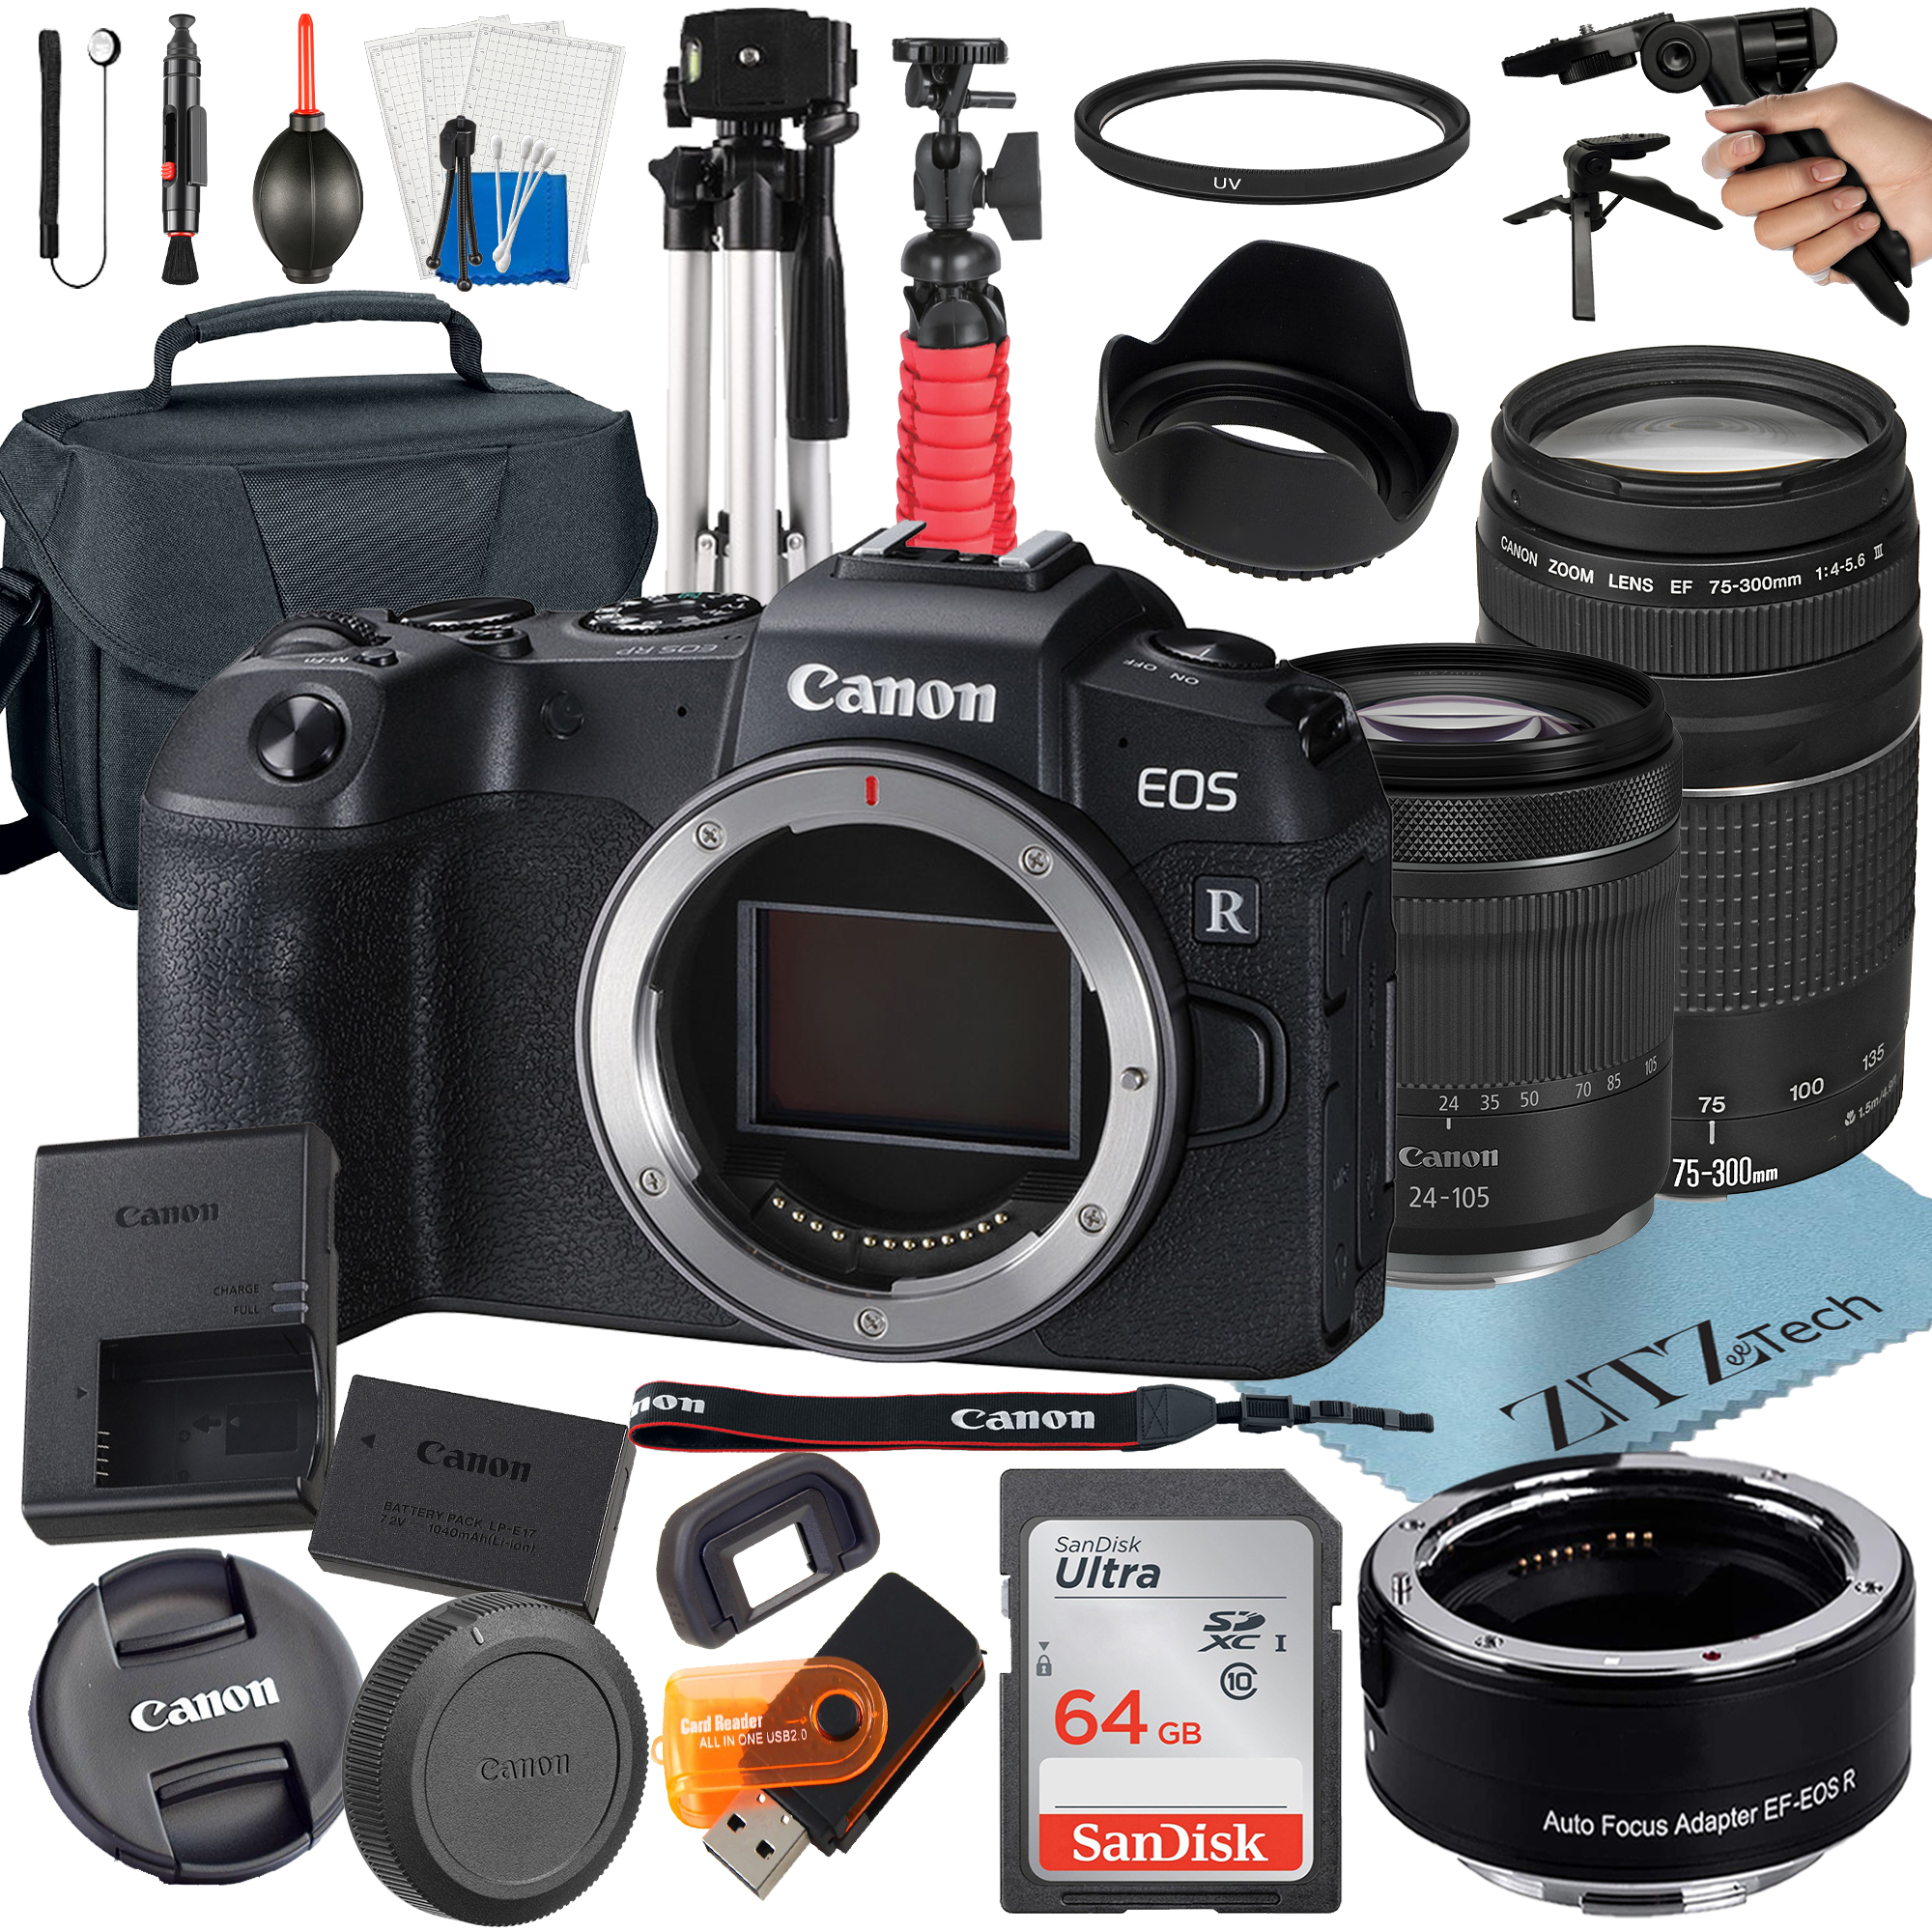 Canon EOS RP Mirrorless Camera with RF 24-105mm STM + 75-300mm Lens + Mount Adapter + 64GB SanDisk + ZeeTech Accessory